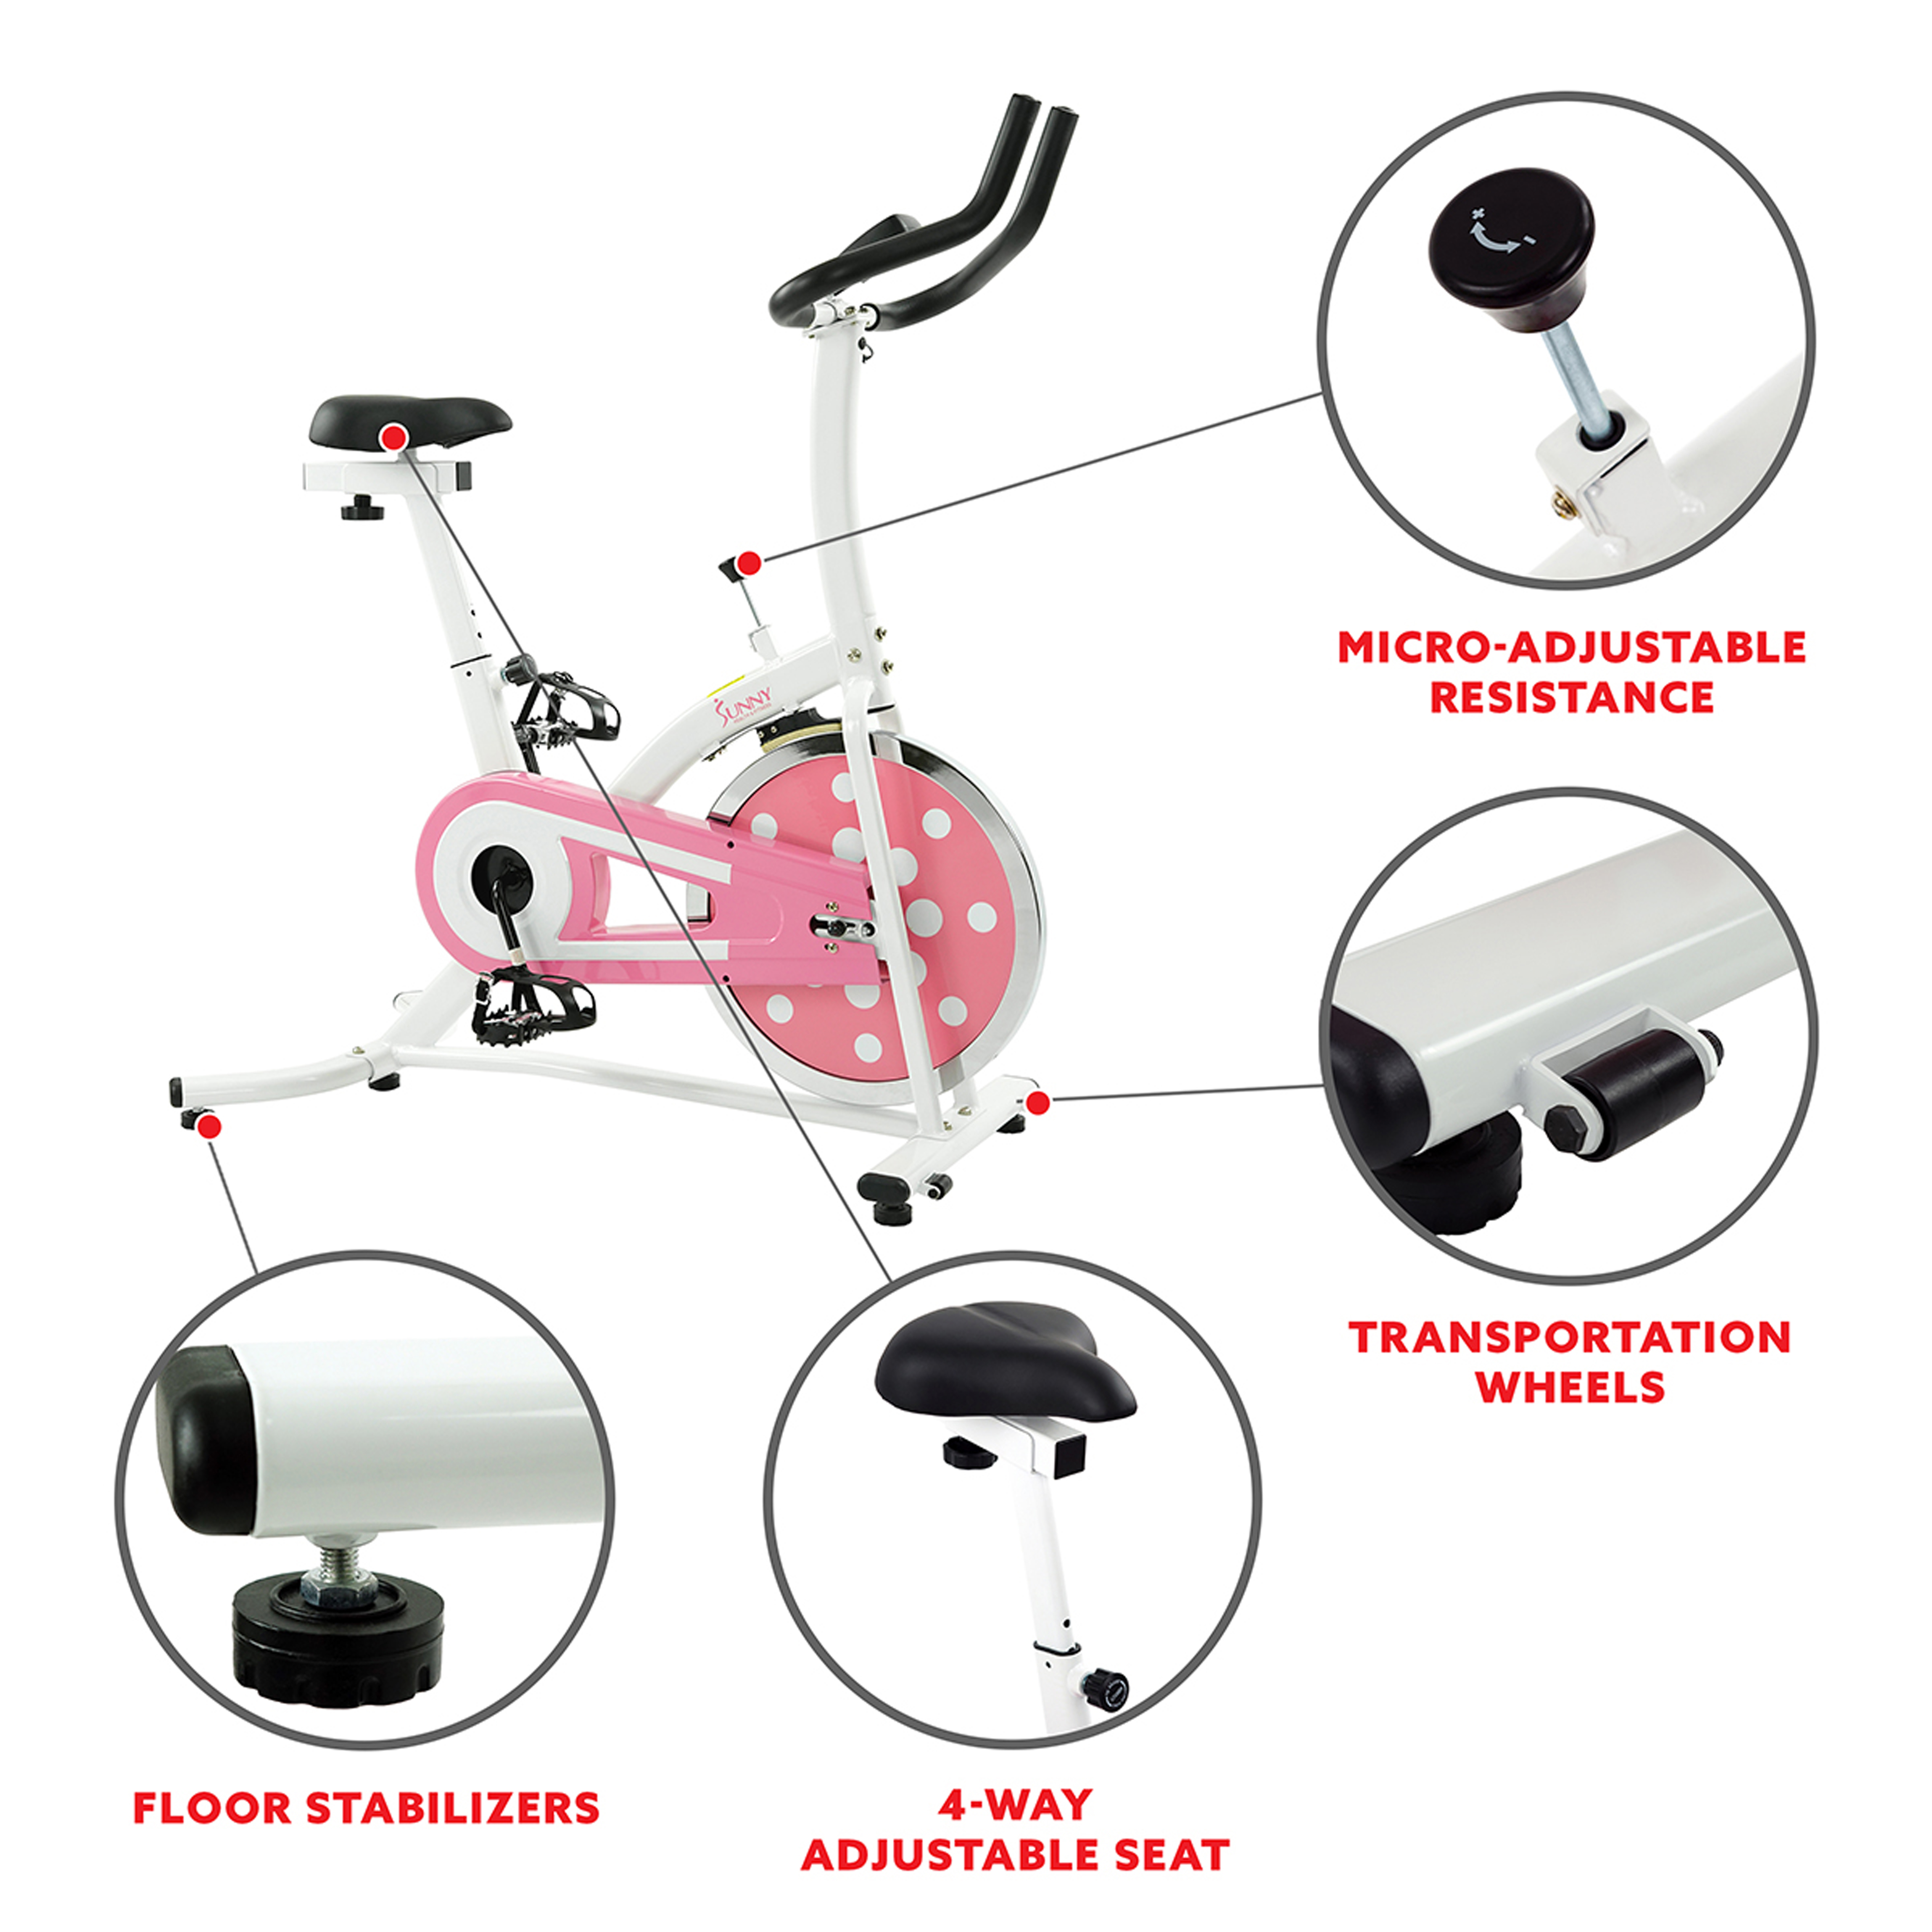 Sunny Health & Fitness Pink Chain Drive Indoor Cycling Exercise Stationary Bike w/ Monitor for Home Workout, Sport Training P8100 - image 5 of 8